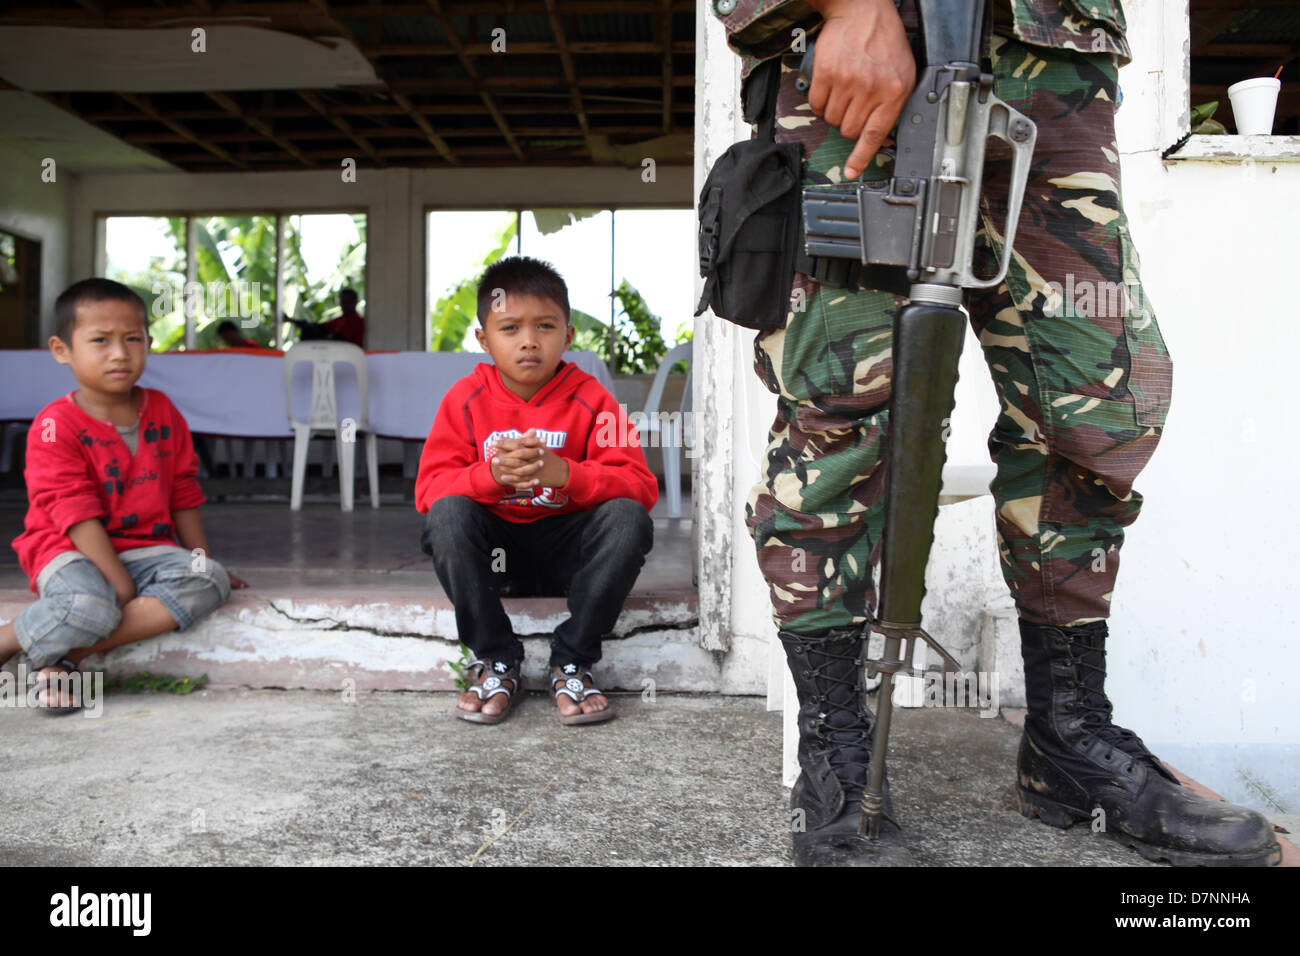 SULTAN KUDARAT, Philippines, 11th May, 2013 -- Filipino Muslim children are seen beside a soldier May 11, 2013 at the old provincial capitol in Sultan Kudarat town in the southern Philippine province of Maguindanao. The Philippine military have raised the red alert in the region as the Commission on Elections deputized them to secure on May 13, 2013 political process. In the past, Philippine elections have been marred by violence and corruption, but this year, President Benigno Aquino's government has enforced several measures in an effort to curb the bloodshed. Stock Photo